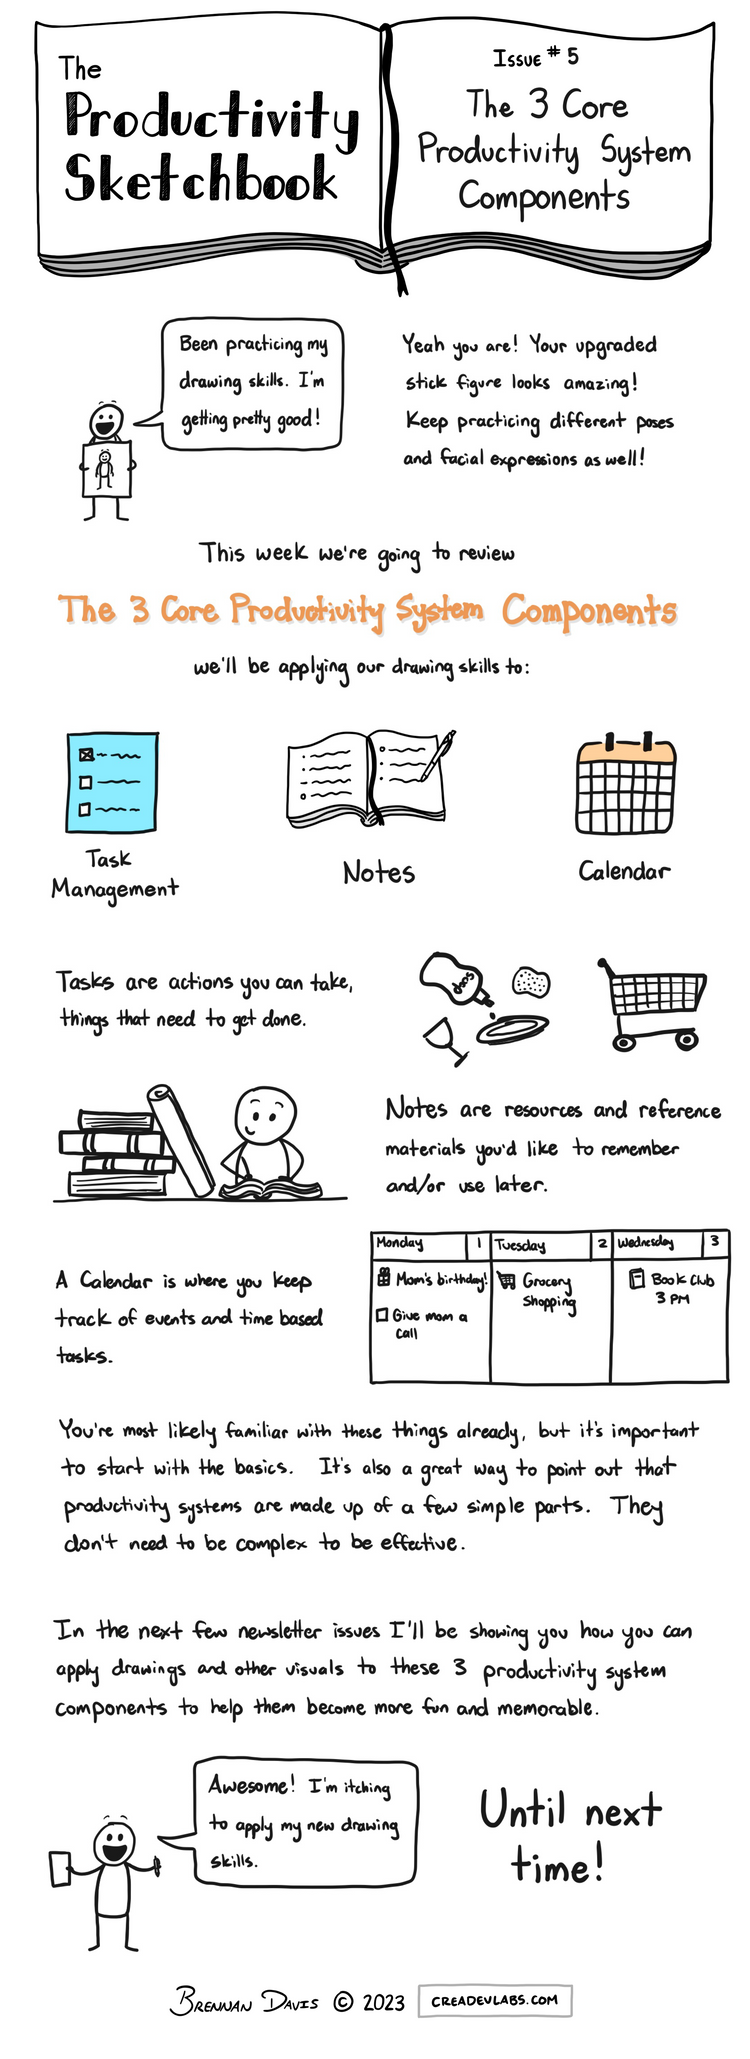 The Productivity Sketchbook #5: The 3 Core Productivity System Components